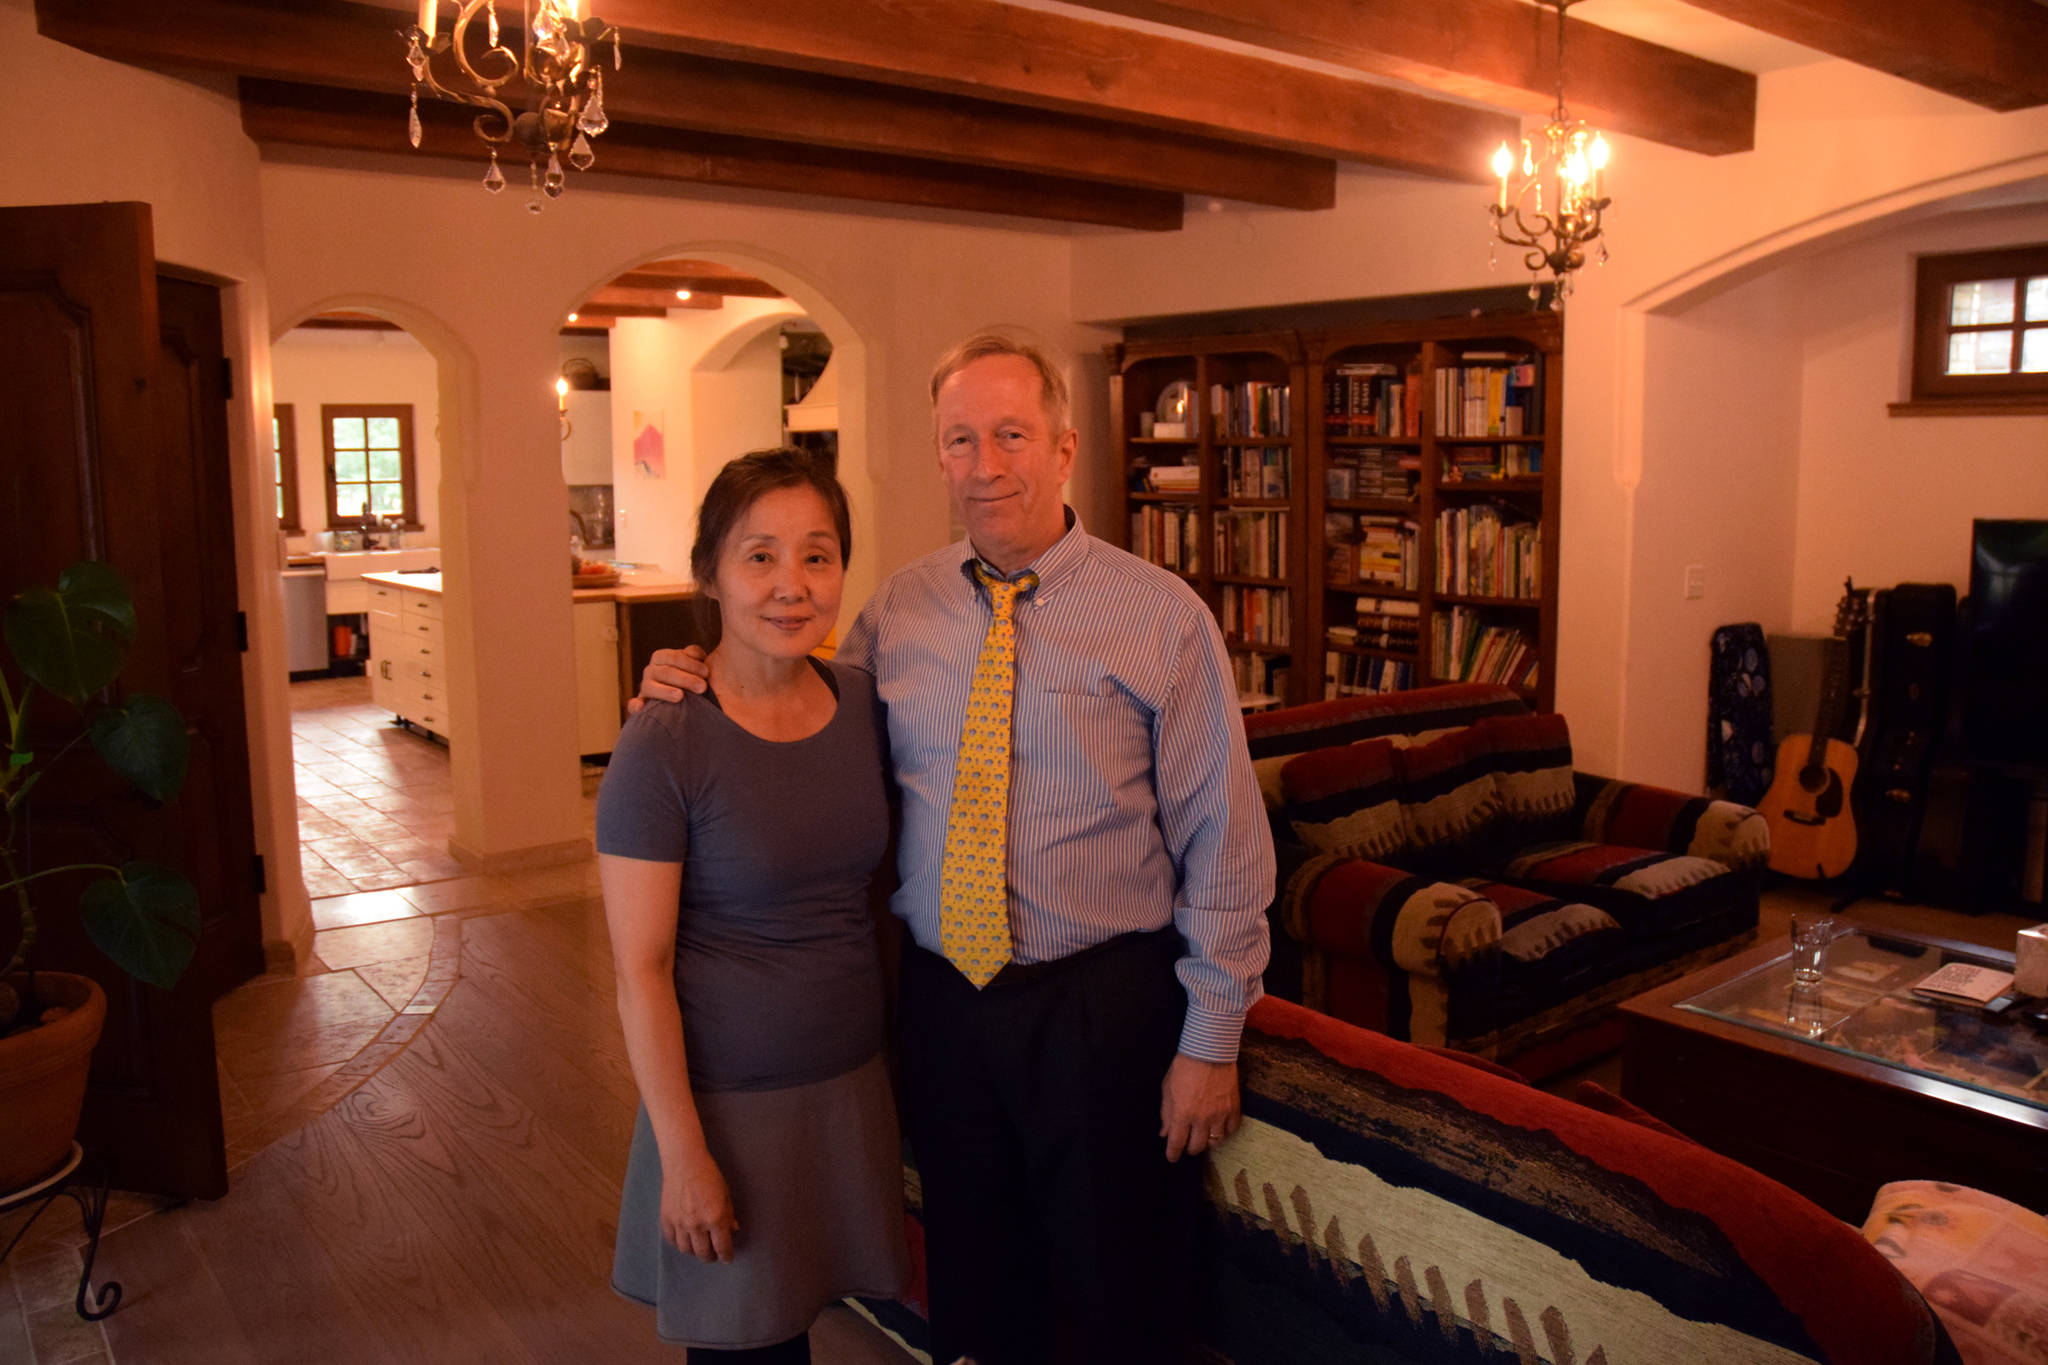 PHOTOS BY James Brooks | Juneau Empire  Sun Hee and Mark Choate stand in the living room of their new home on Thursday.